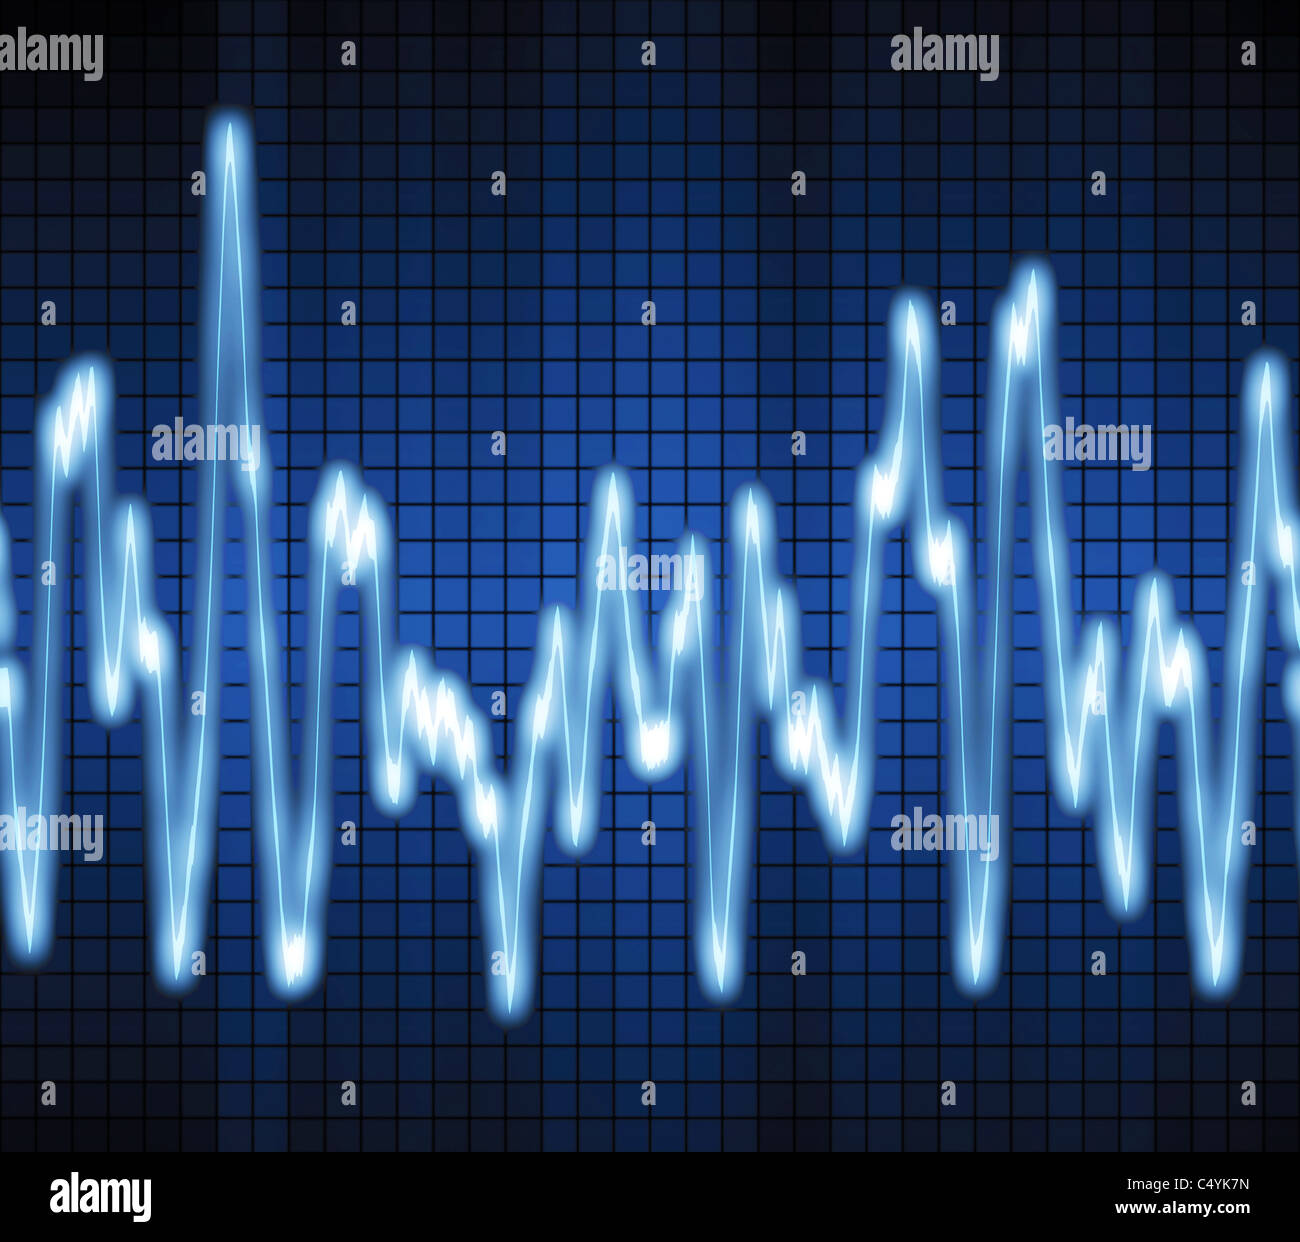 image of a blue audio or sound wave Stock Photo